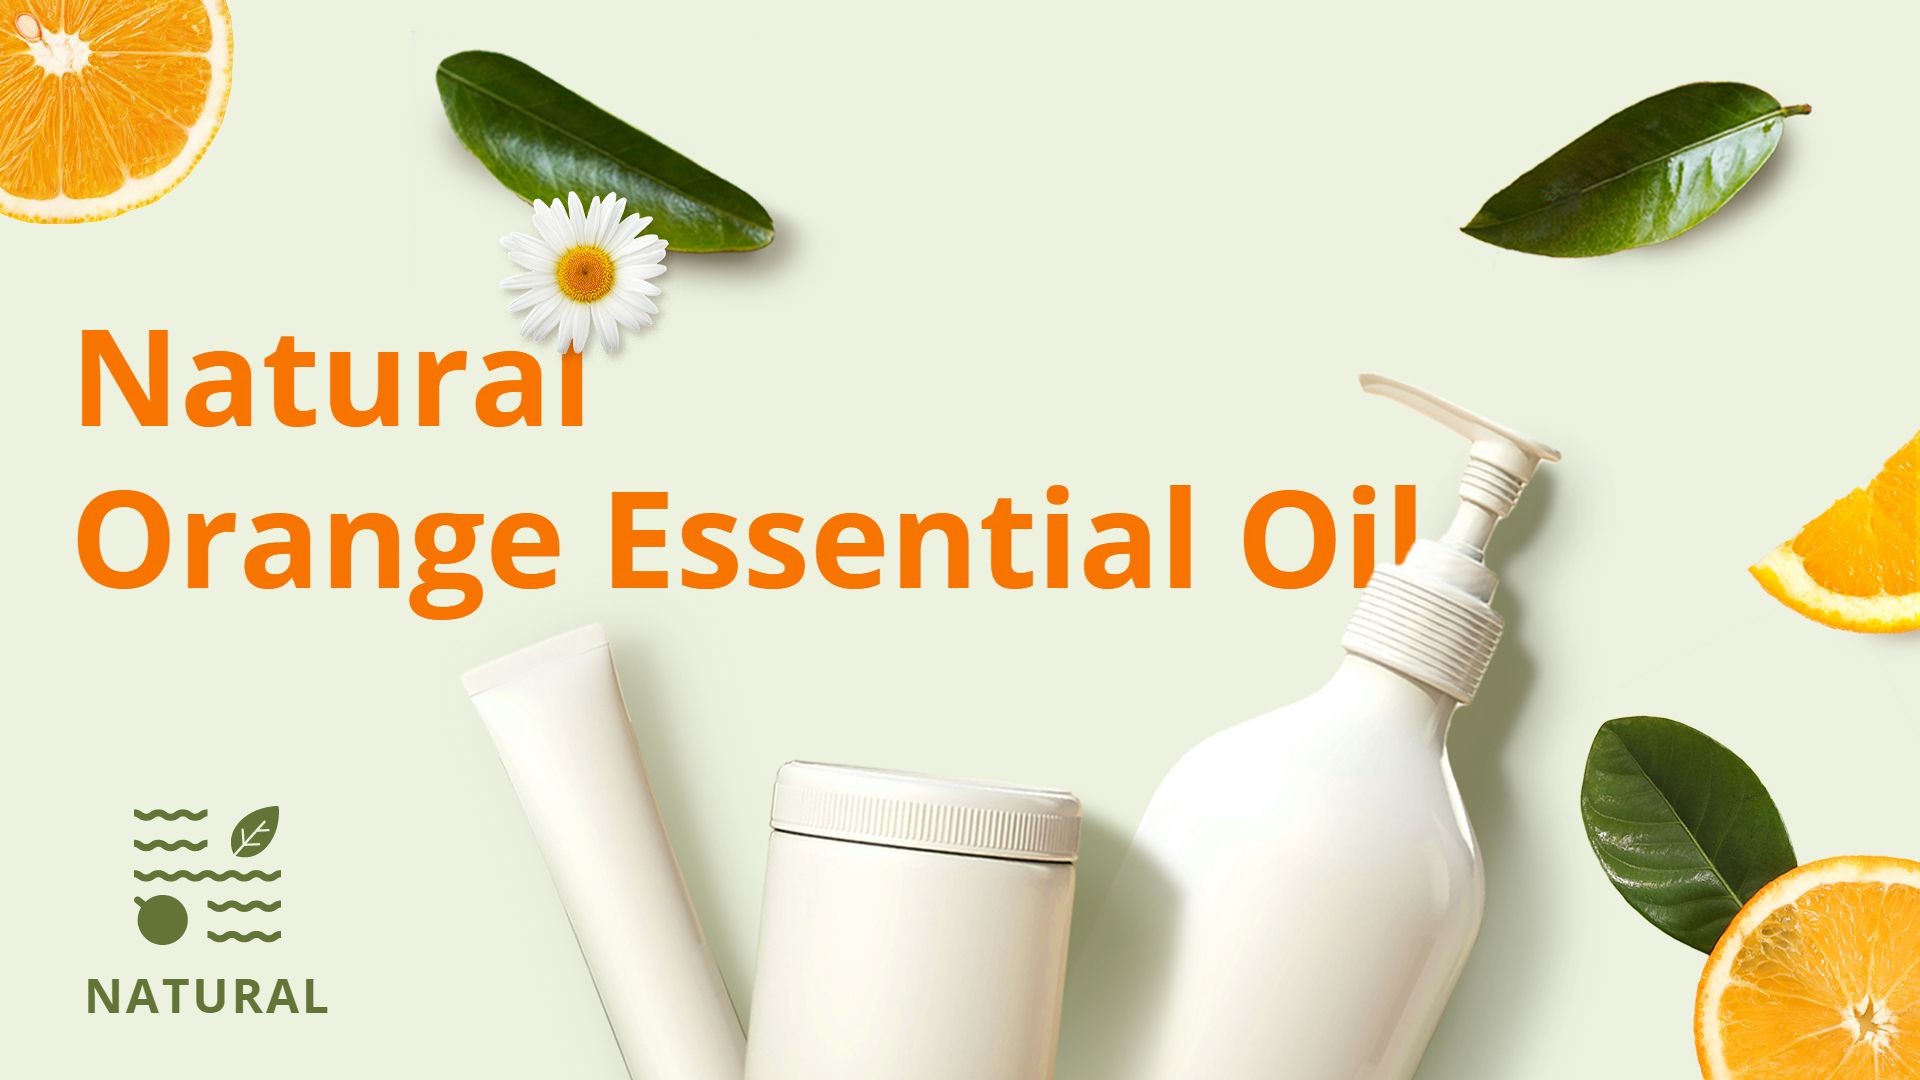 Natural Organic Personal Care Skincare Beauty Cosmetics Product Ecommerce Banner